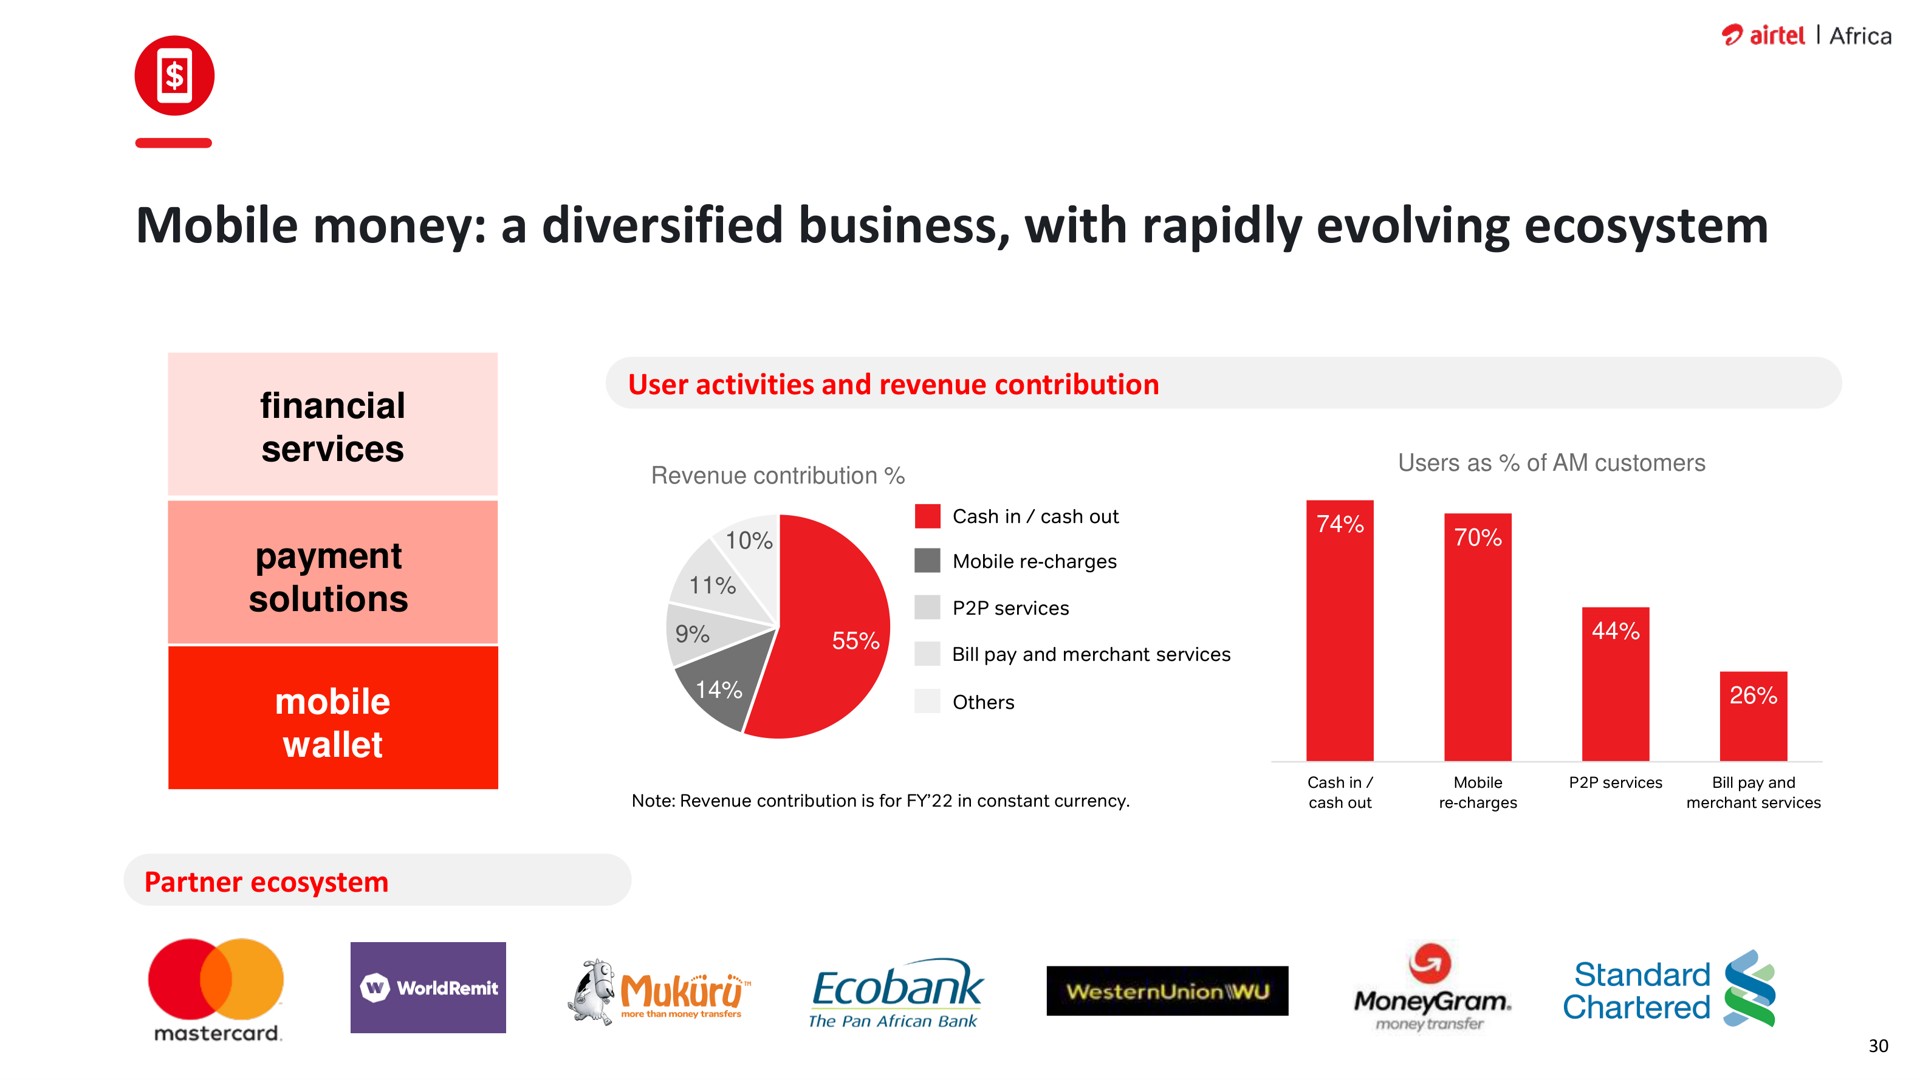 mobile money a diversified business with rapidly evolving ecosystem financial services wallet standard chartered | Airtel Africa